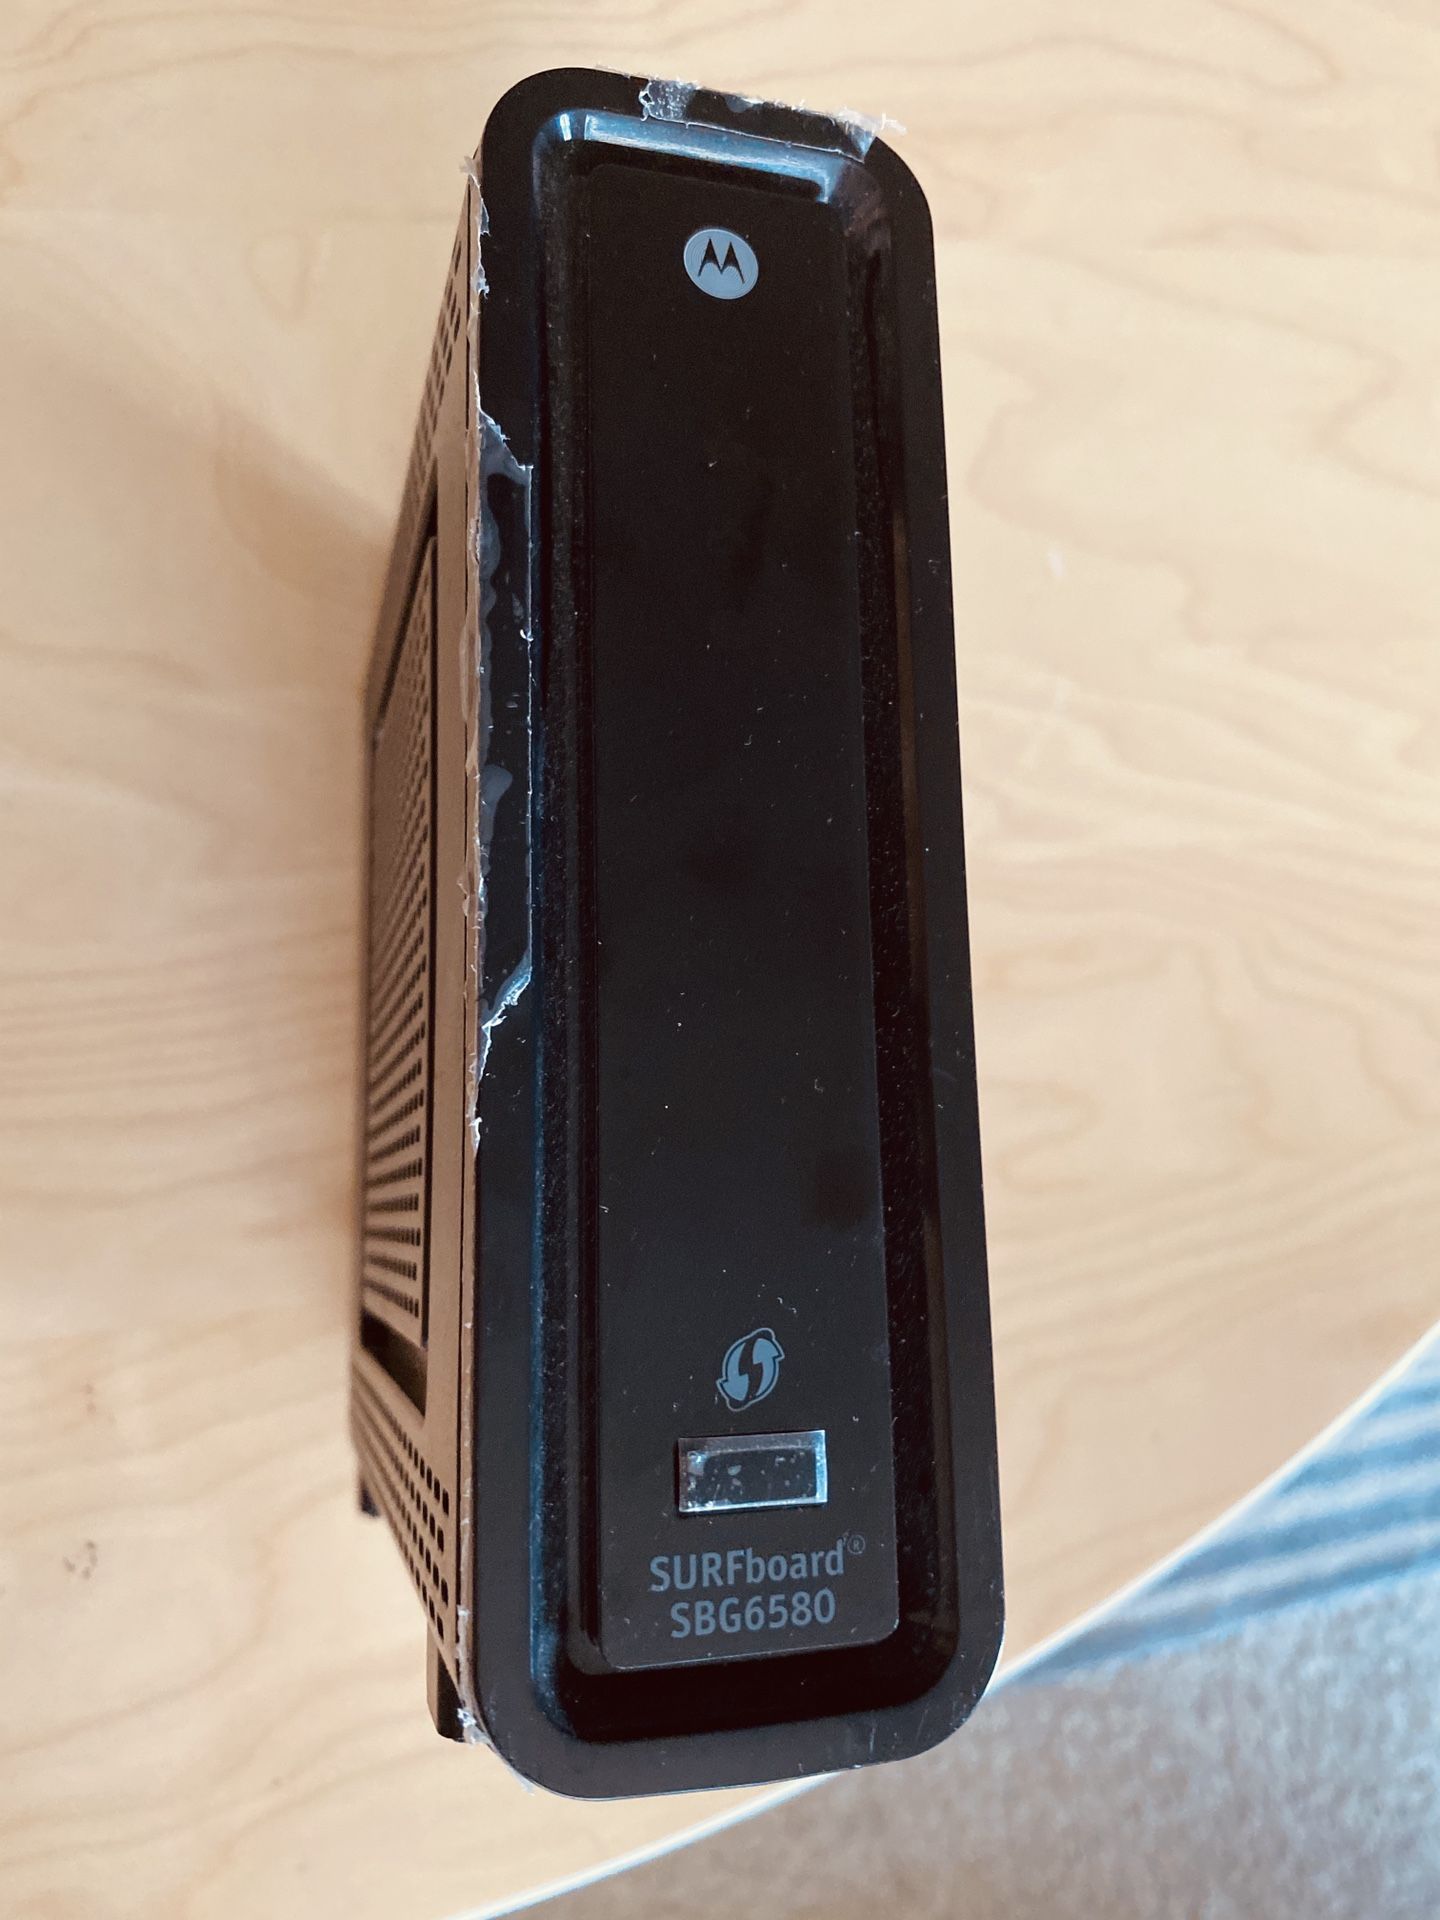 Motorola cable modem with power supply